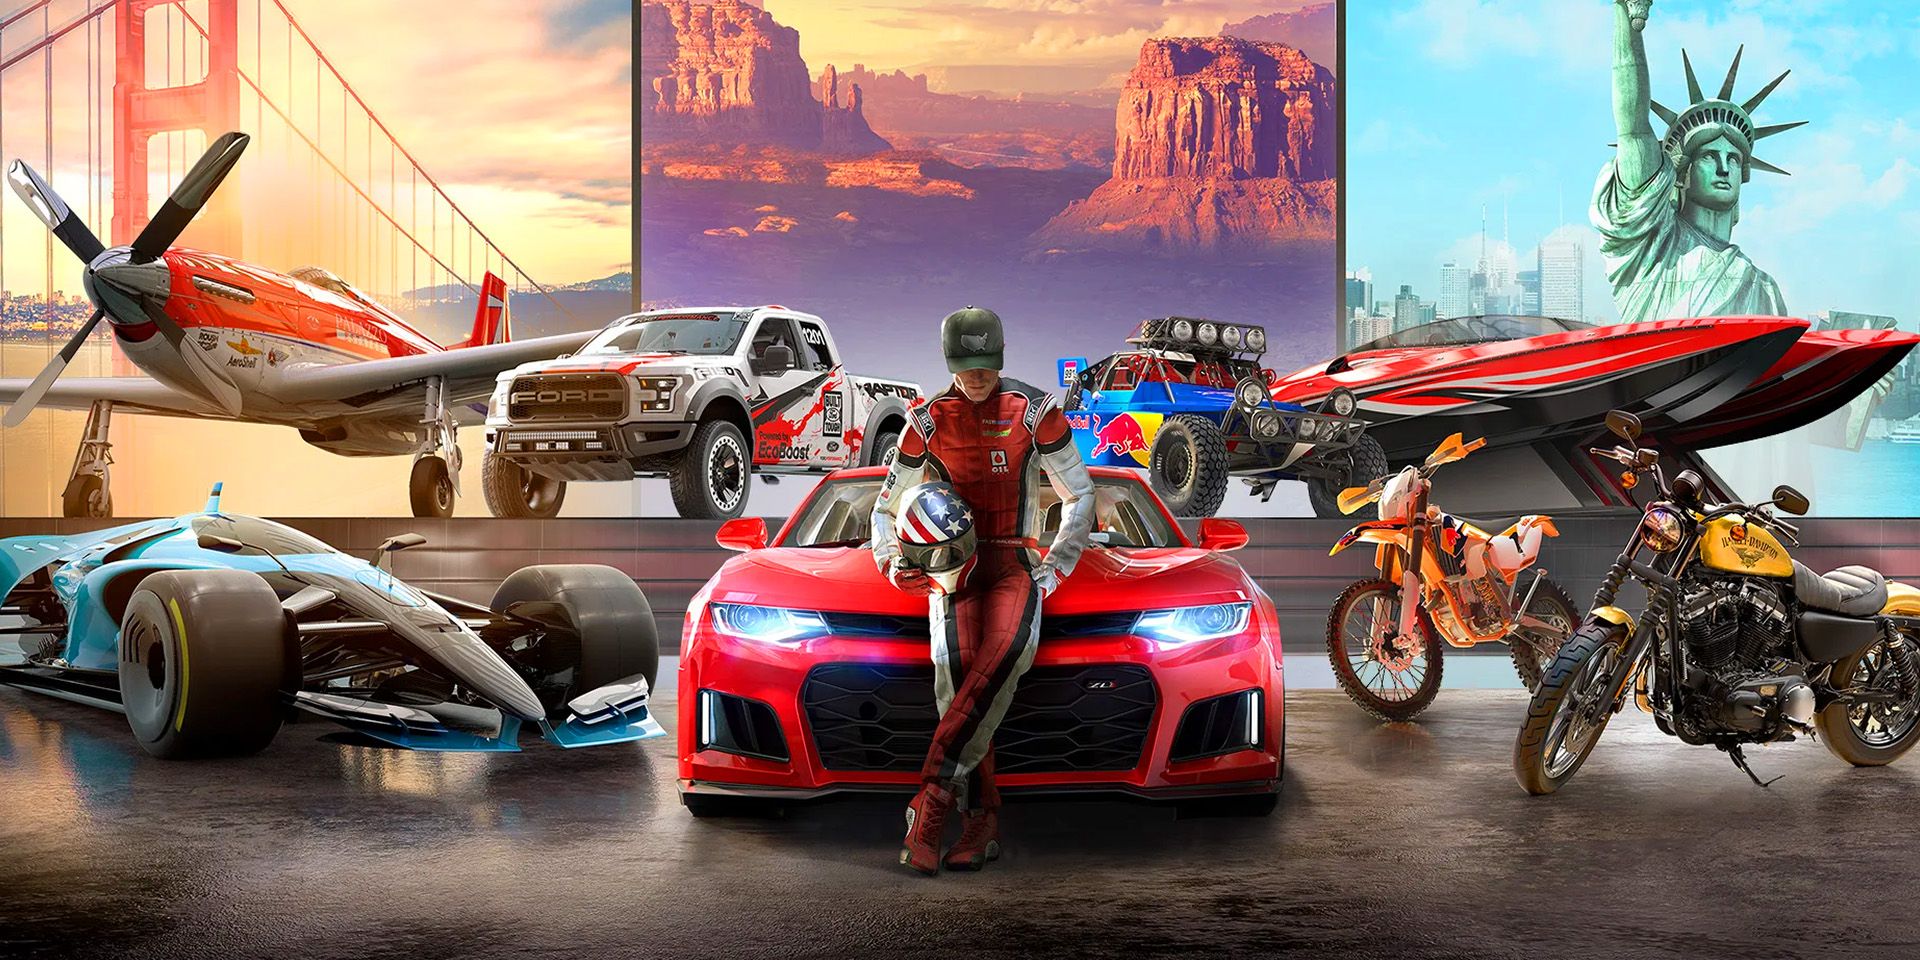 10 Racing Games That Bombed At Launch But Became Cult Classics - Featured